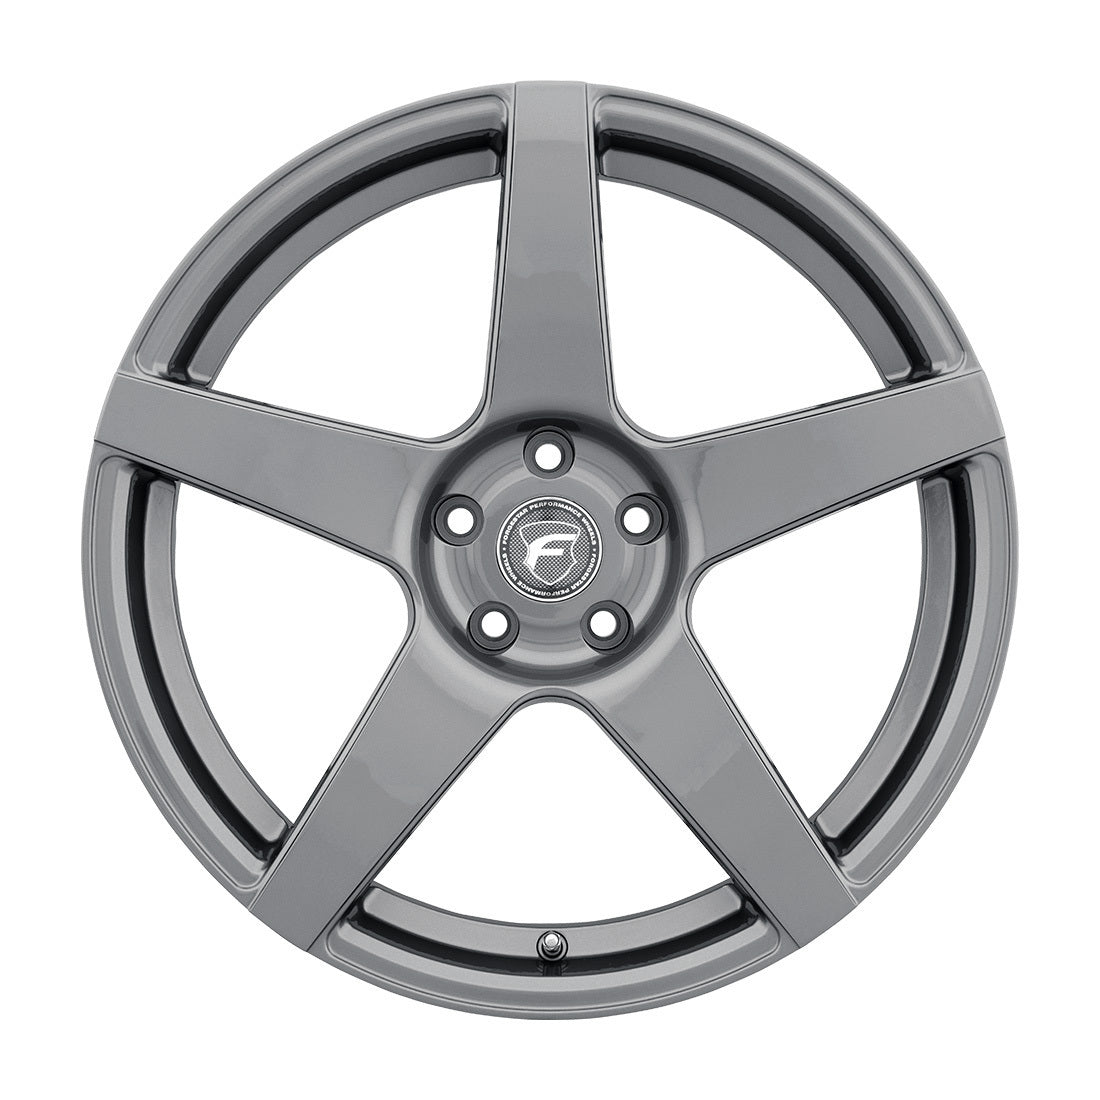 Forgestar CF5 Wheel S550 / S650 Mustang Fitment (Multiple Finishes)